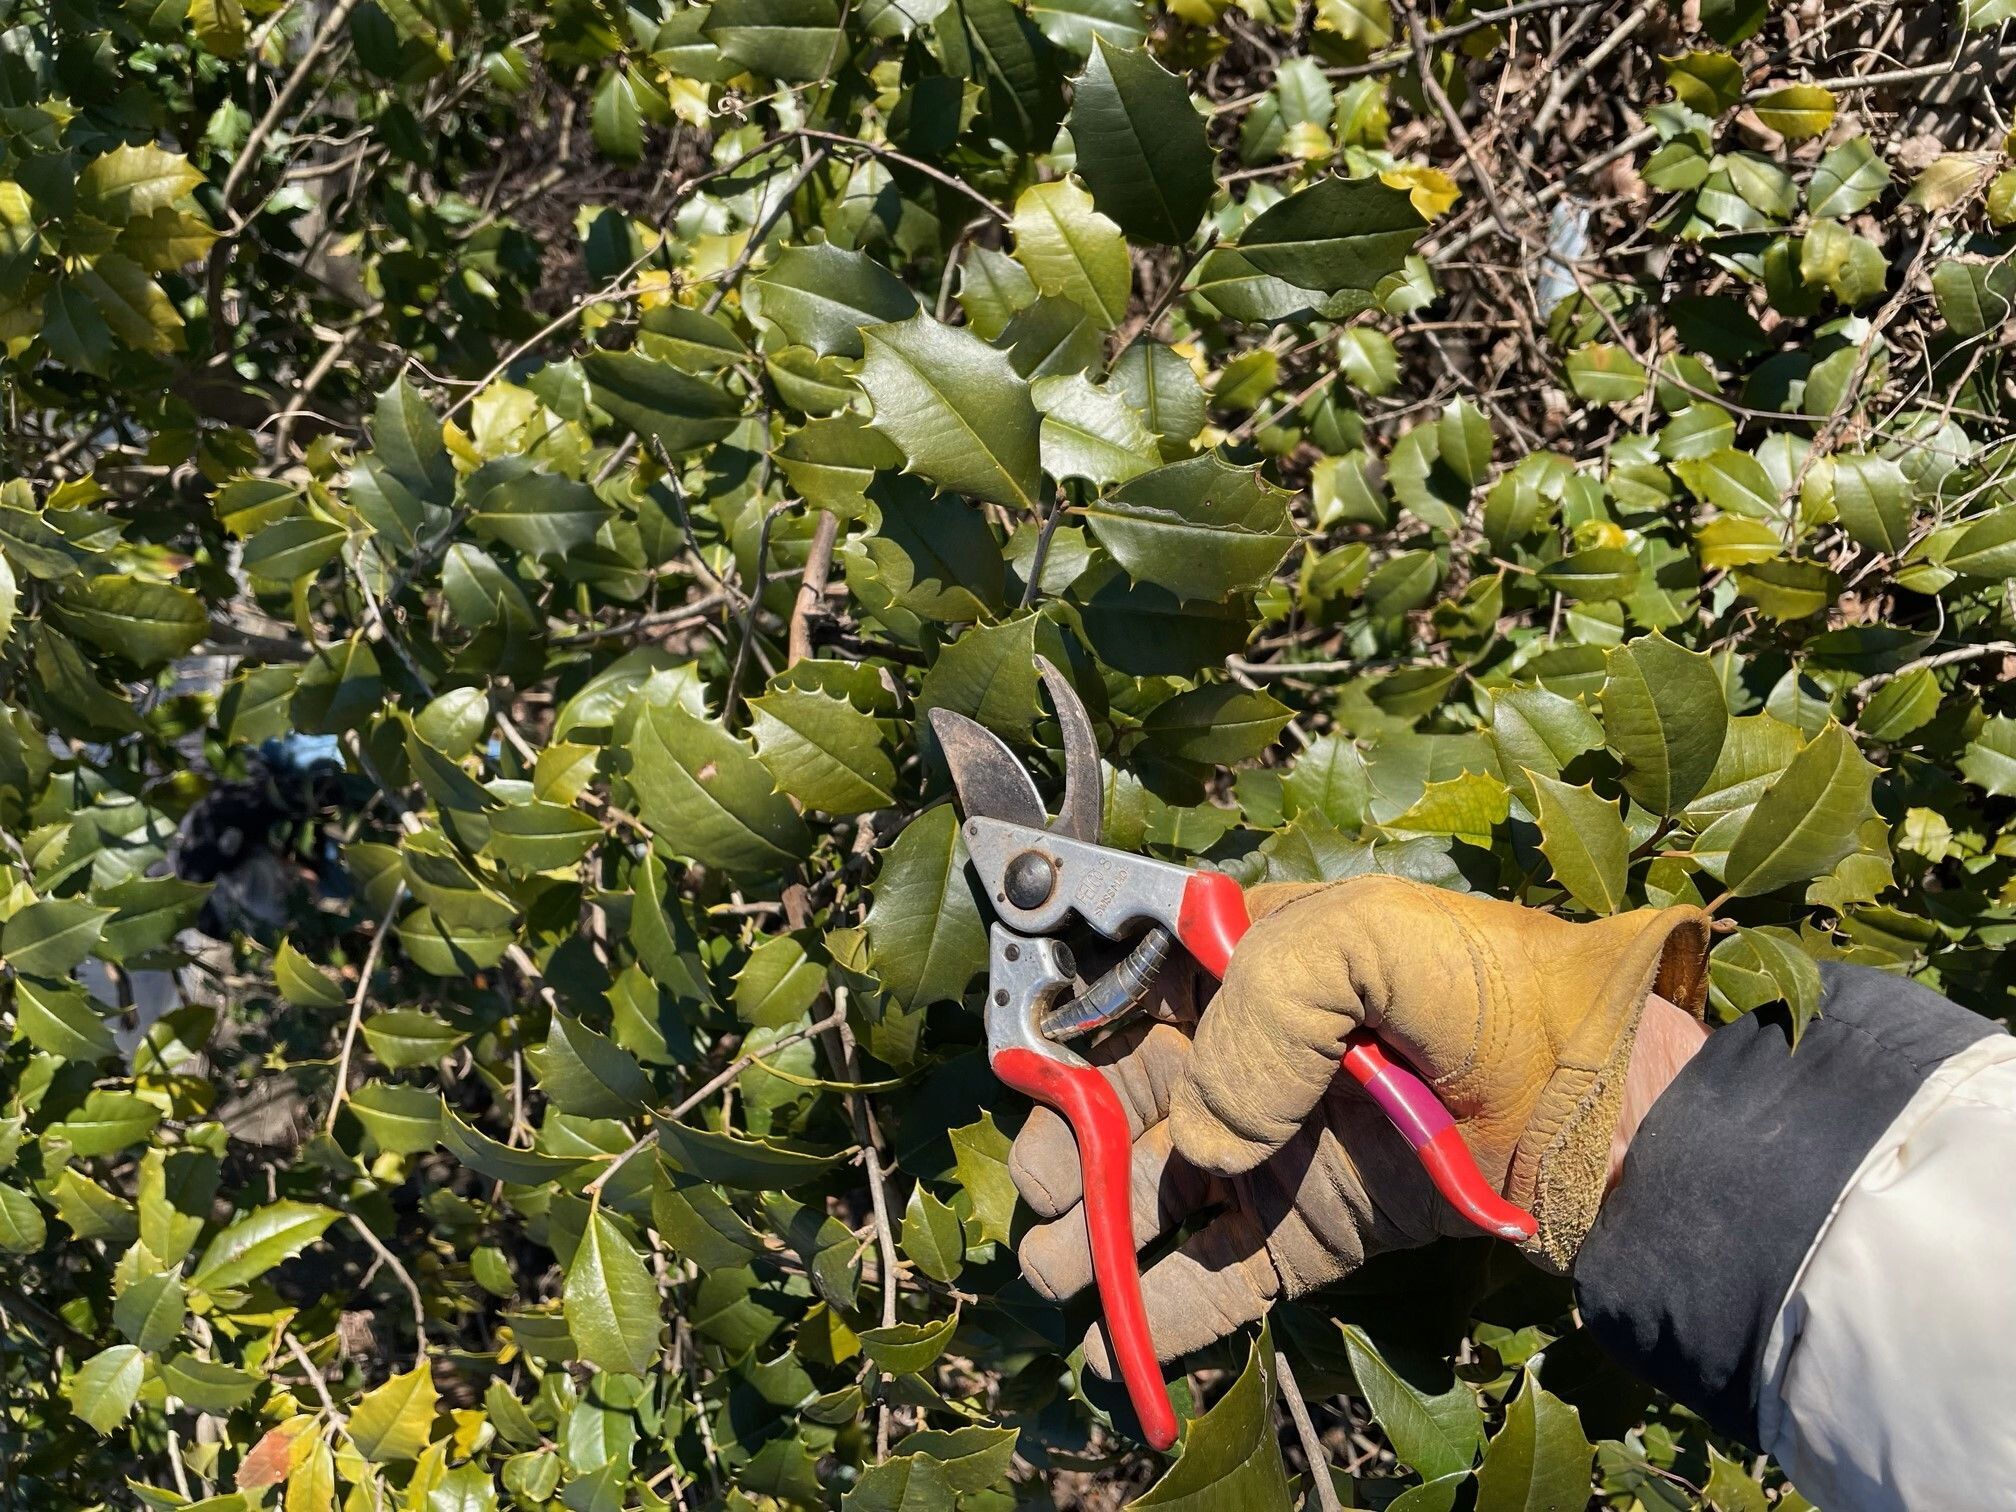 Learn how to Prune Your Own Yard